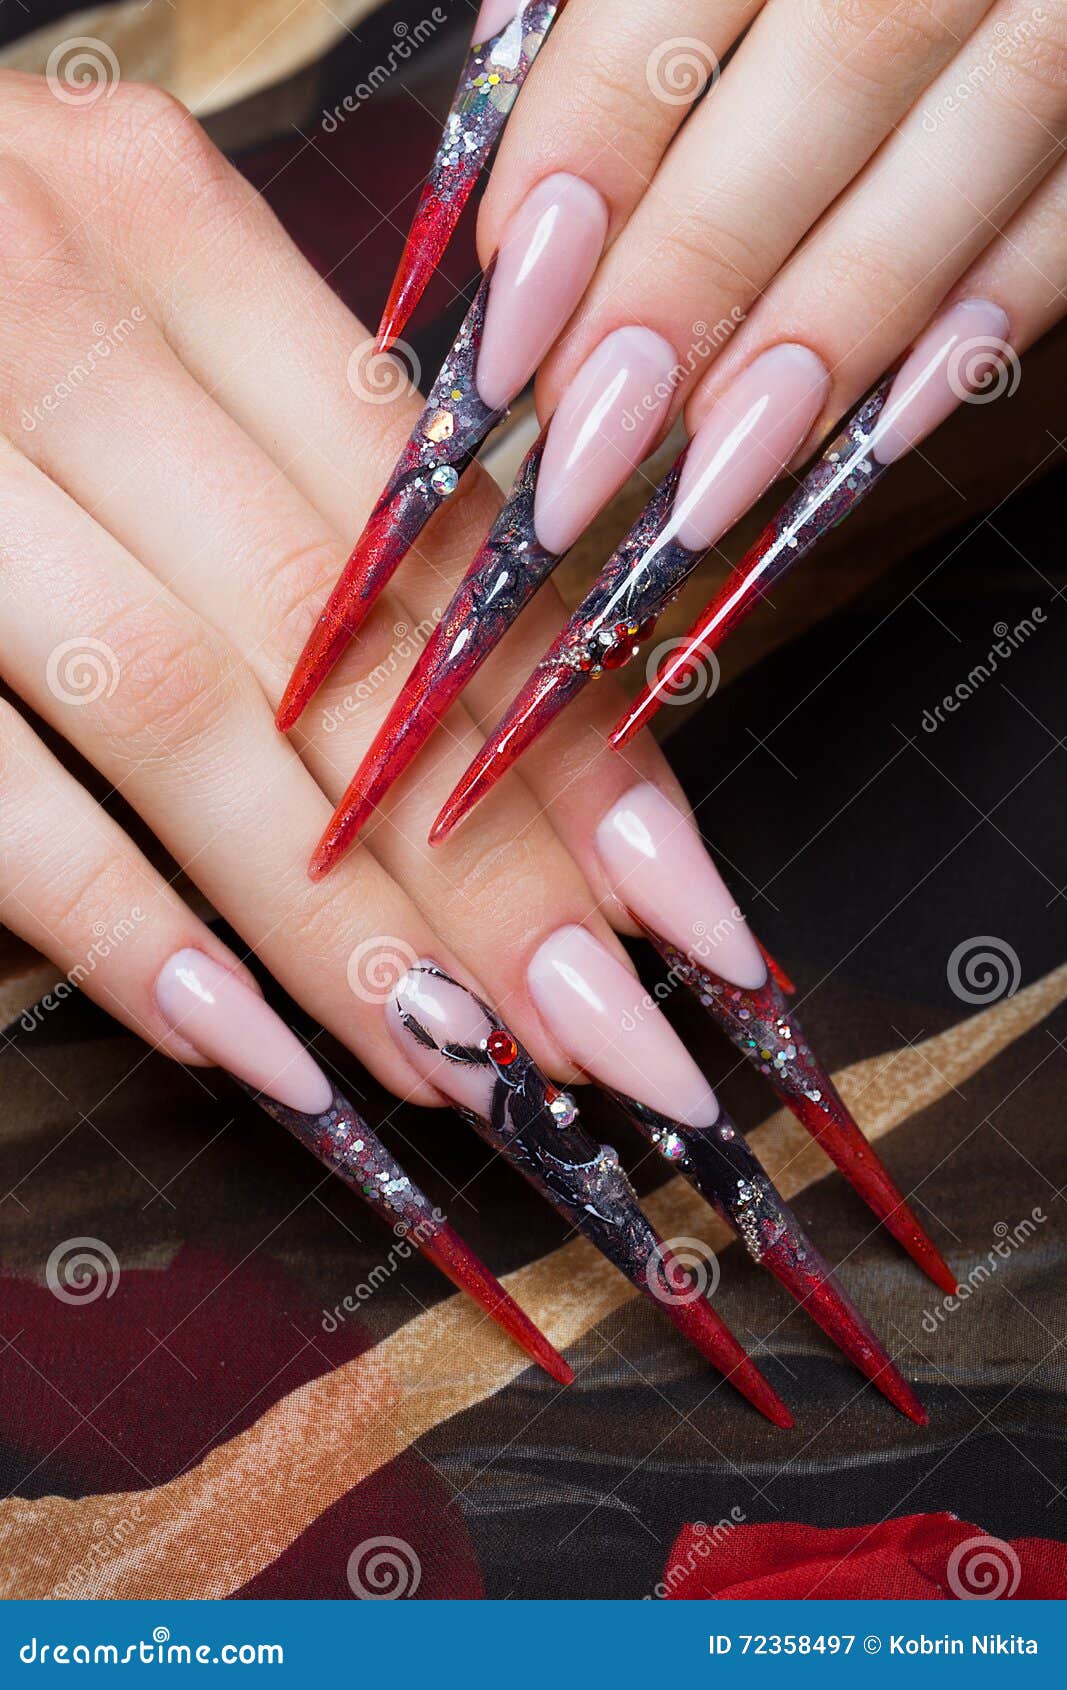 long beautiful manicure fingers black red colors spider nails design close up picture taken studio white 72358497